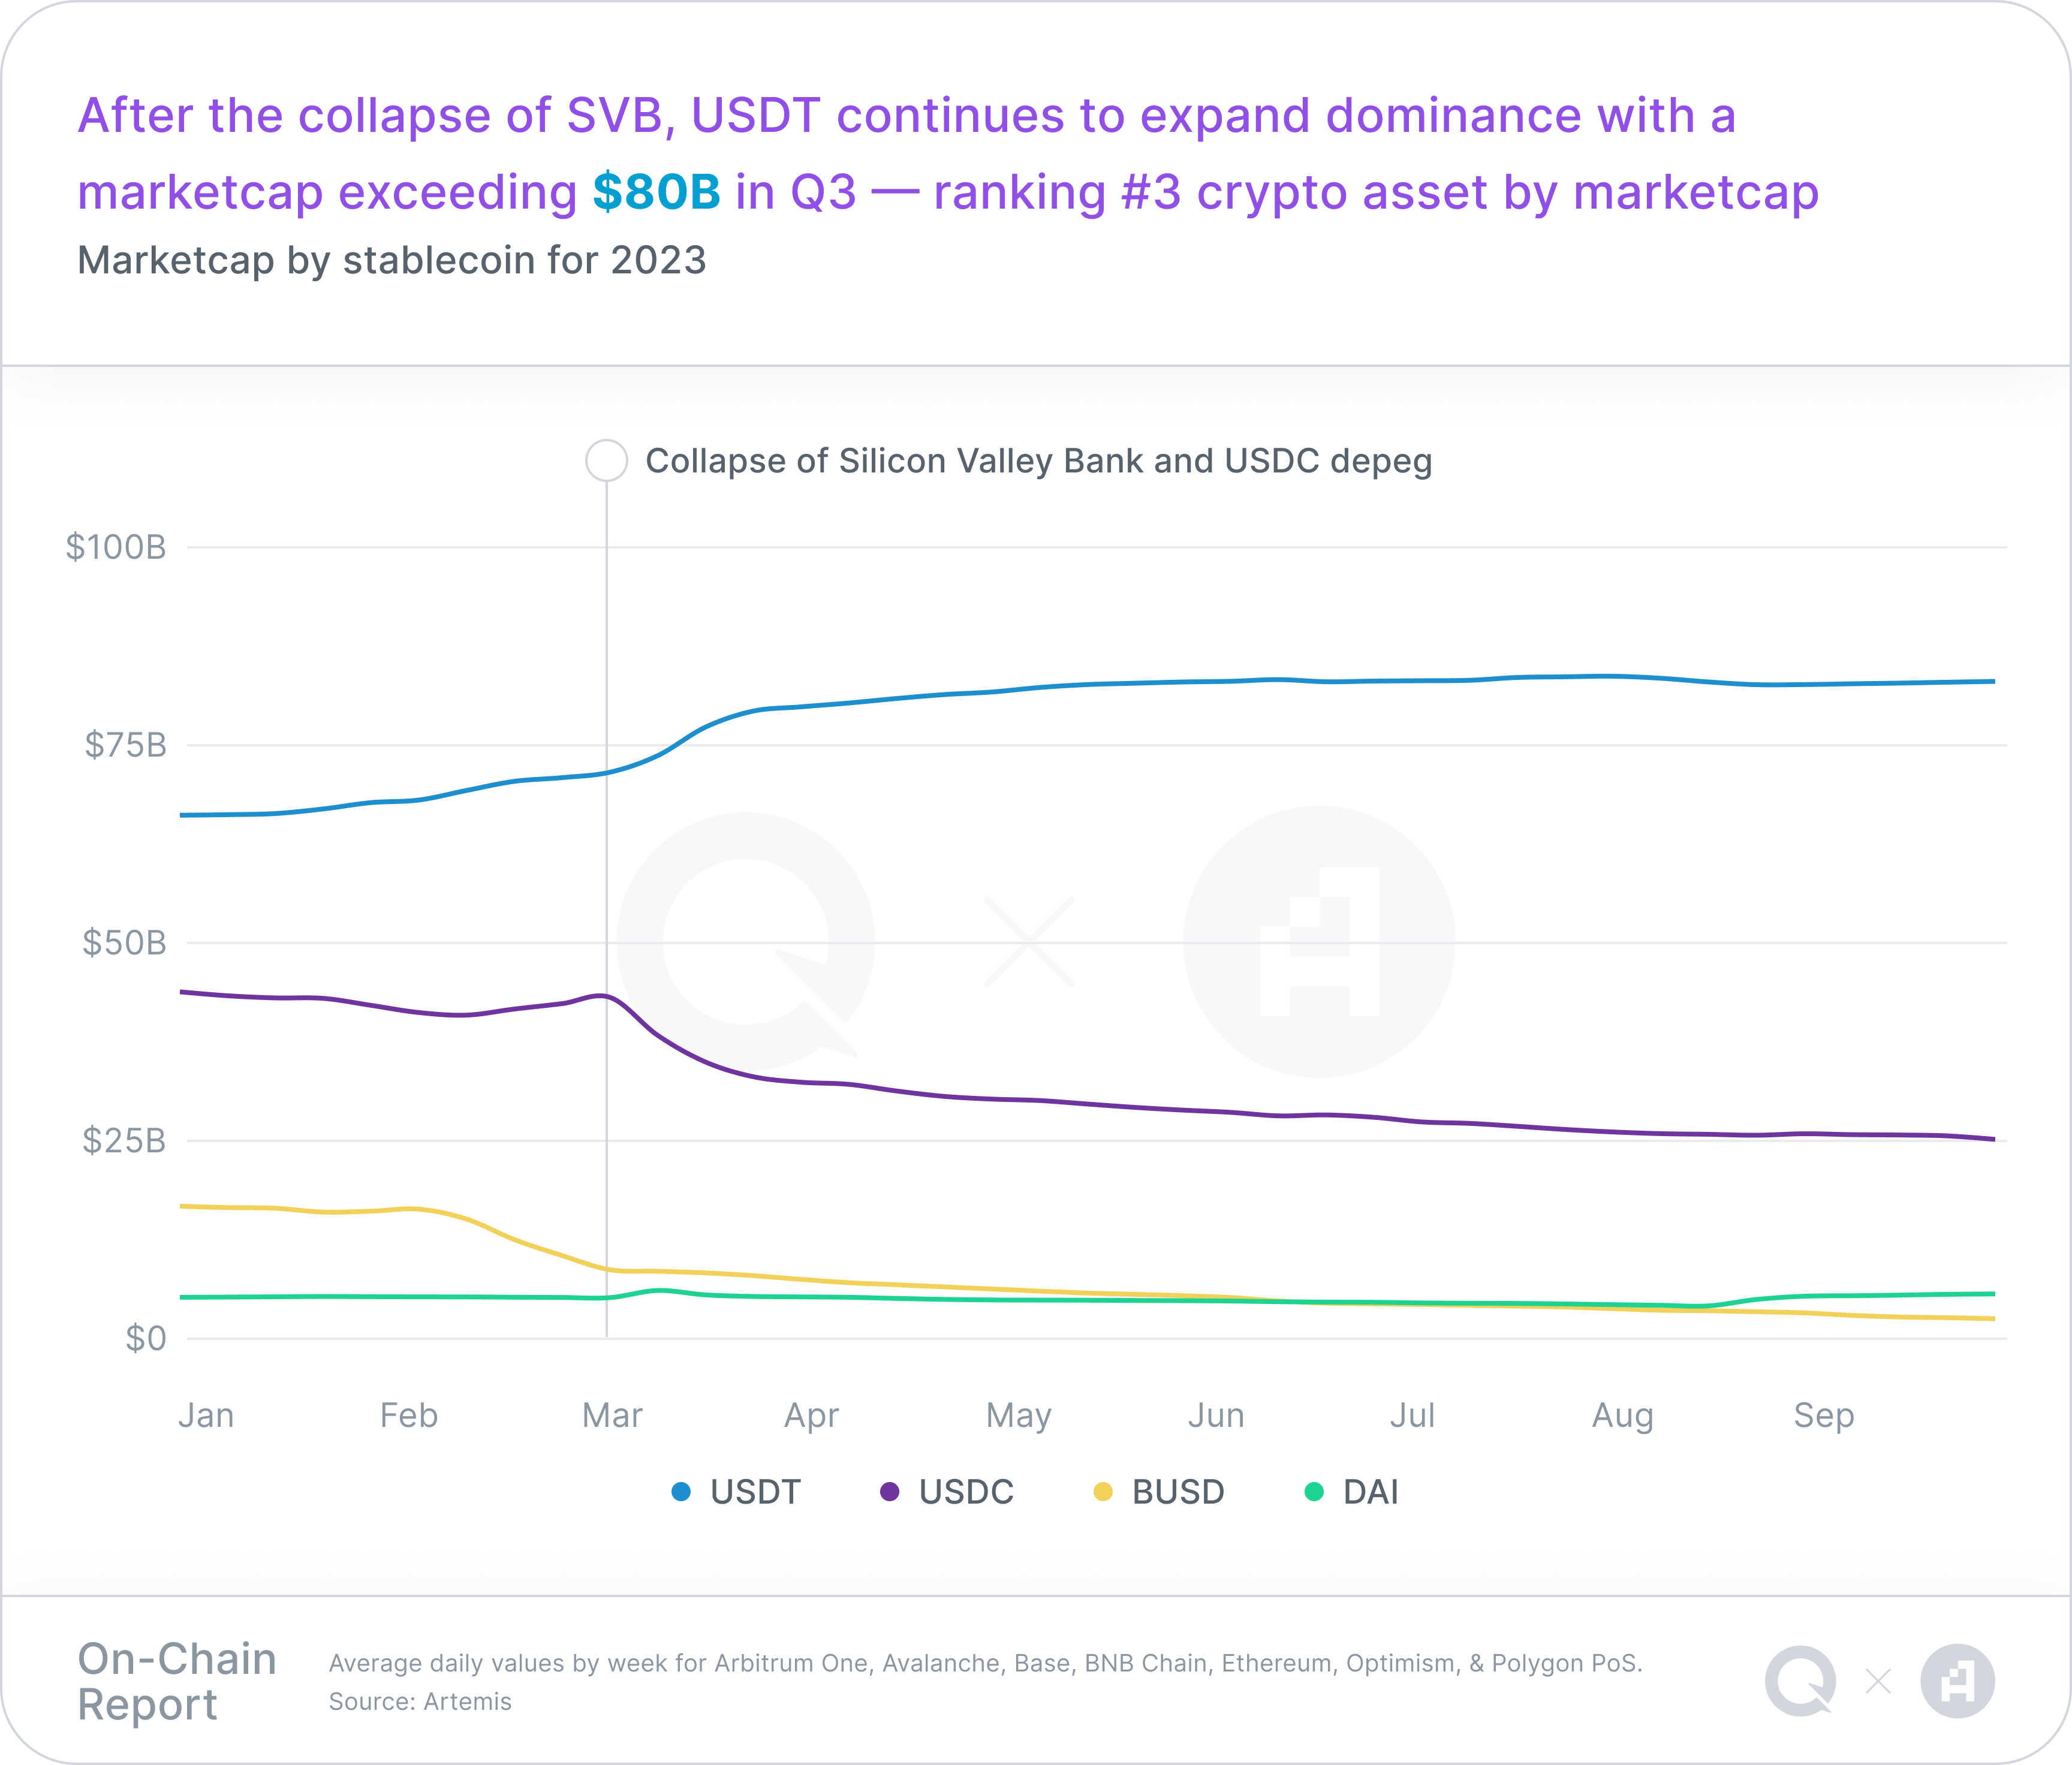 A chart representing marketcap by stablecoin for 2023, with a takeaway headline of "After the collapse of SVB, USDT continues to expand dominance with a marketcap exceeding $80B in Q3 — ranking #3 crypto asset by marketcap"